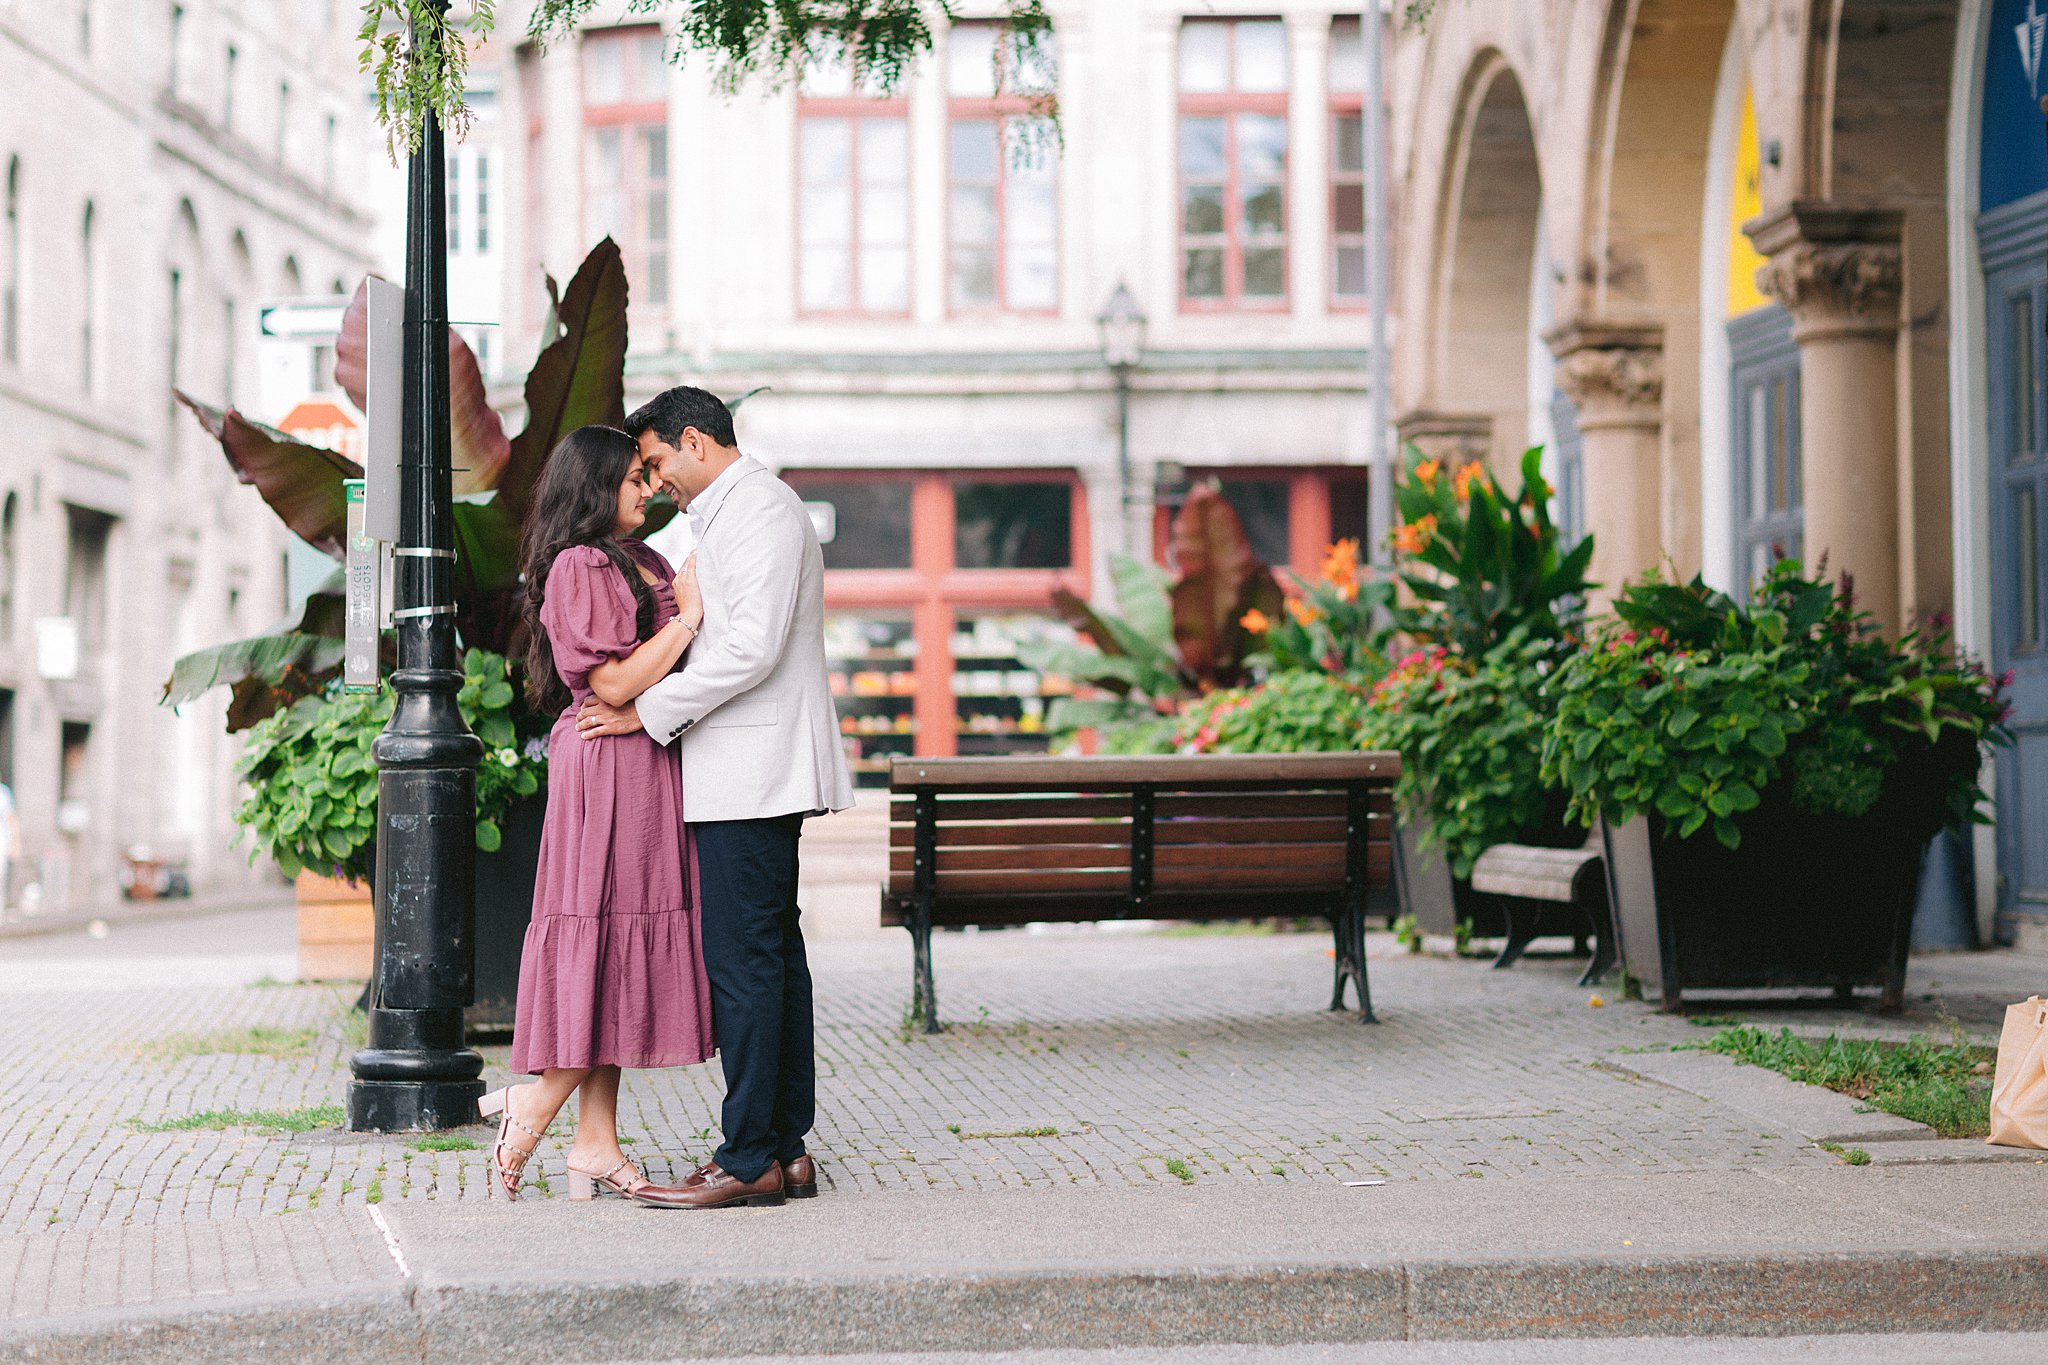 Enchanted by Montreal: A glimpse into their engagement session